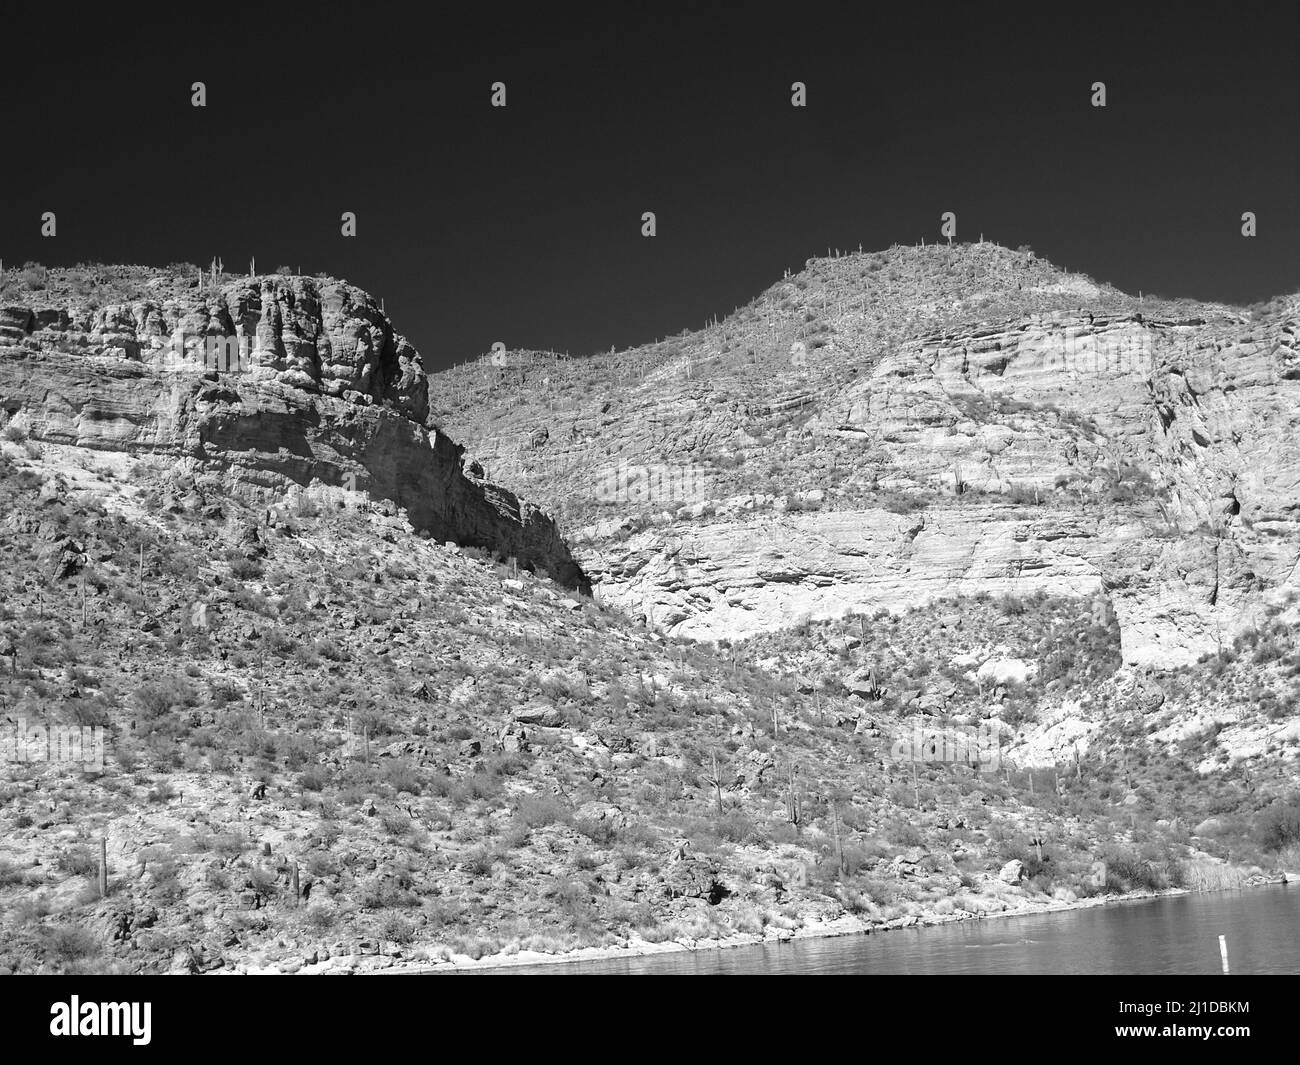 Canyon Lake, Arizona landscapes in color and monotone showing the amazing topography. The lake is surrounded by steep cliffs and majestic vistas. Stock Photo